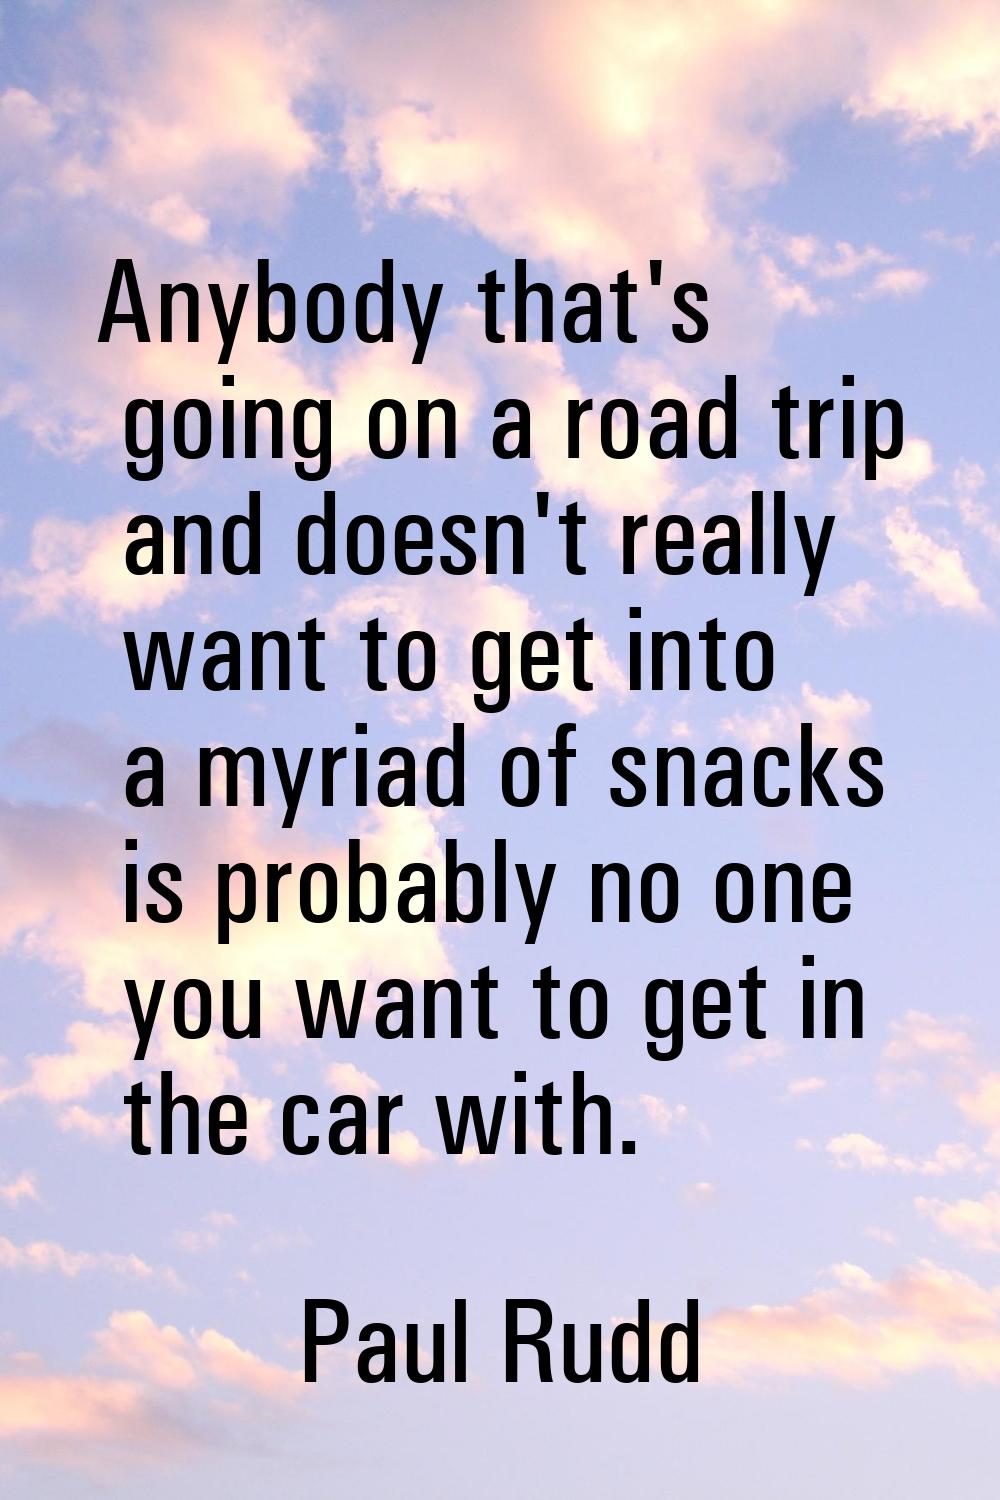 Anybody that's going on a road trip and doesn't really want to get into a myriad of snacks is proba